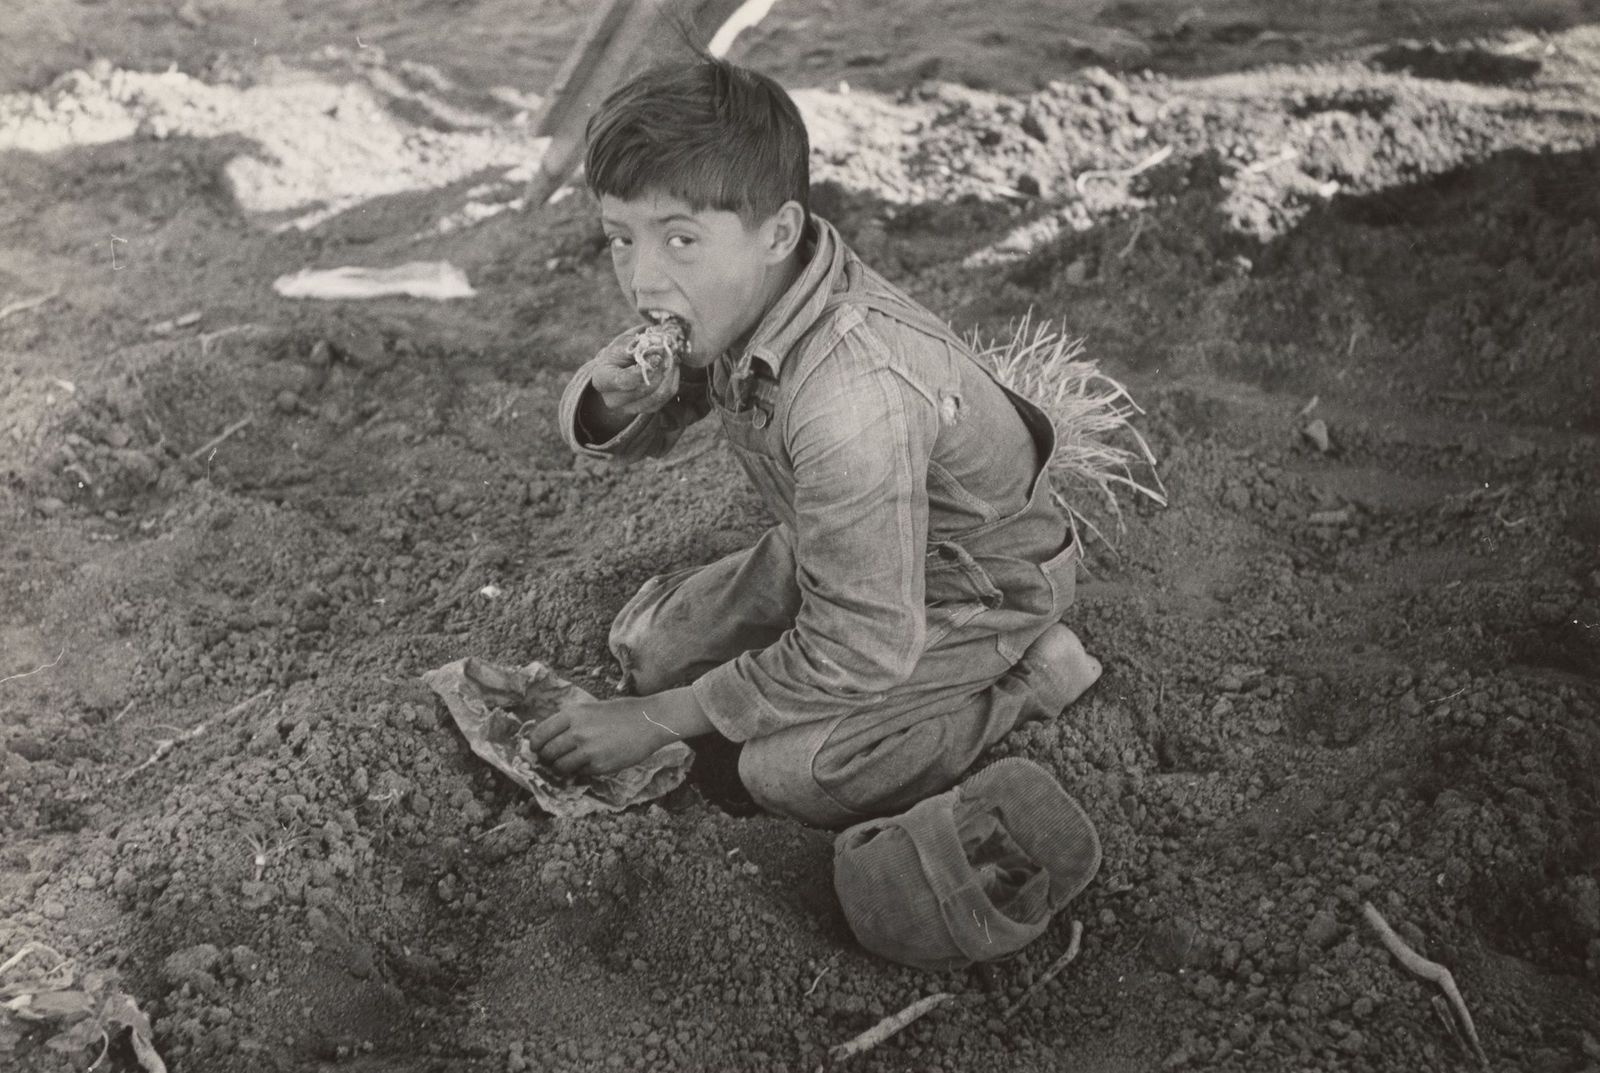 young Mexican agricultural worker eats a tortilla in a field near Santa Monica, Texas, 1939. New York Public Library. Public Domain.